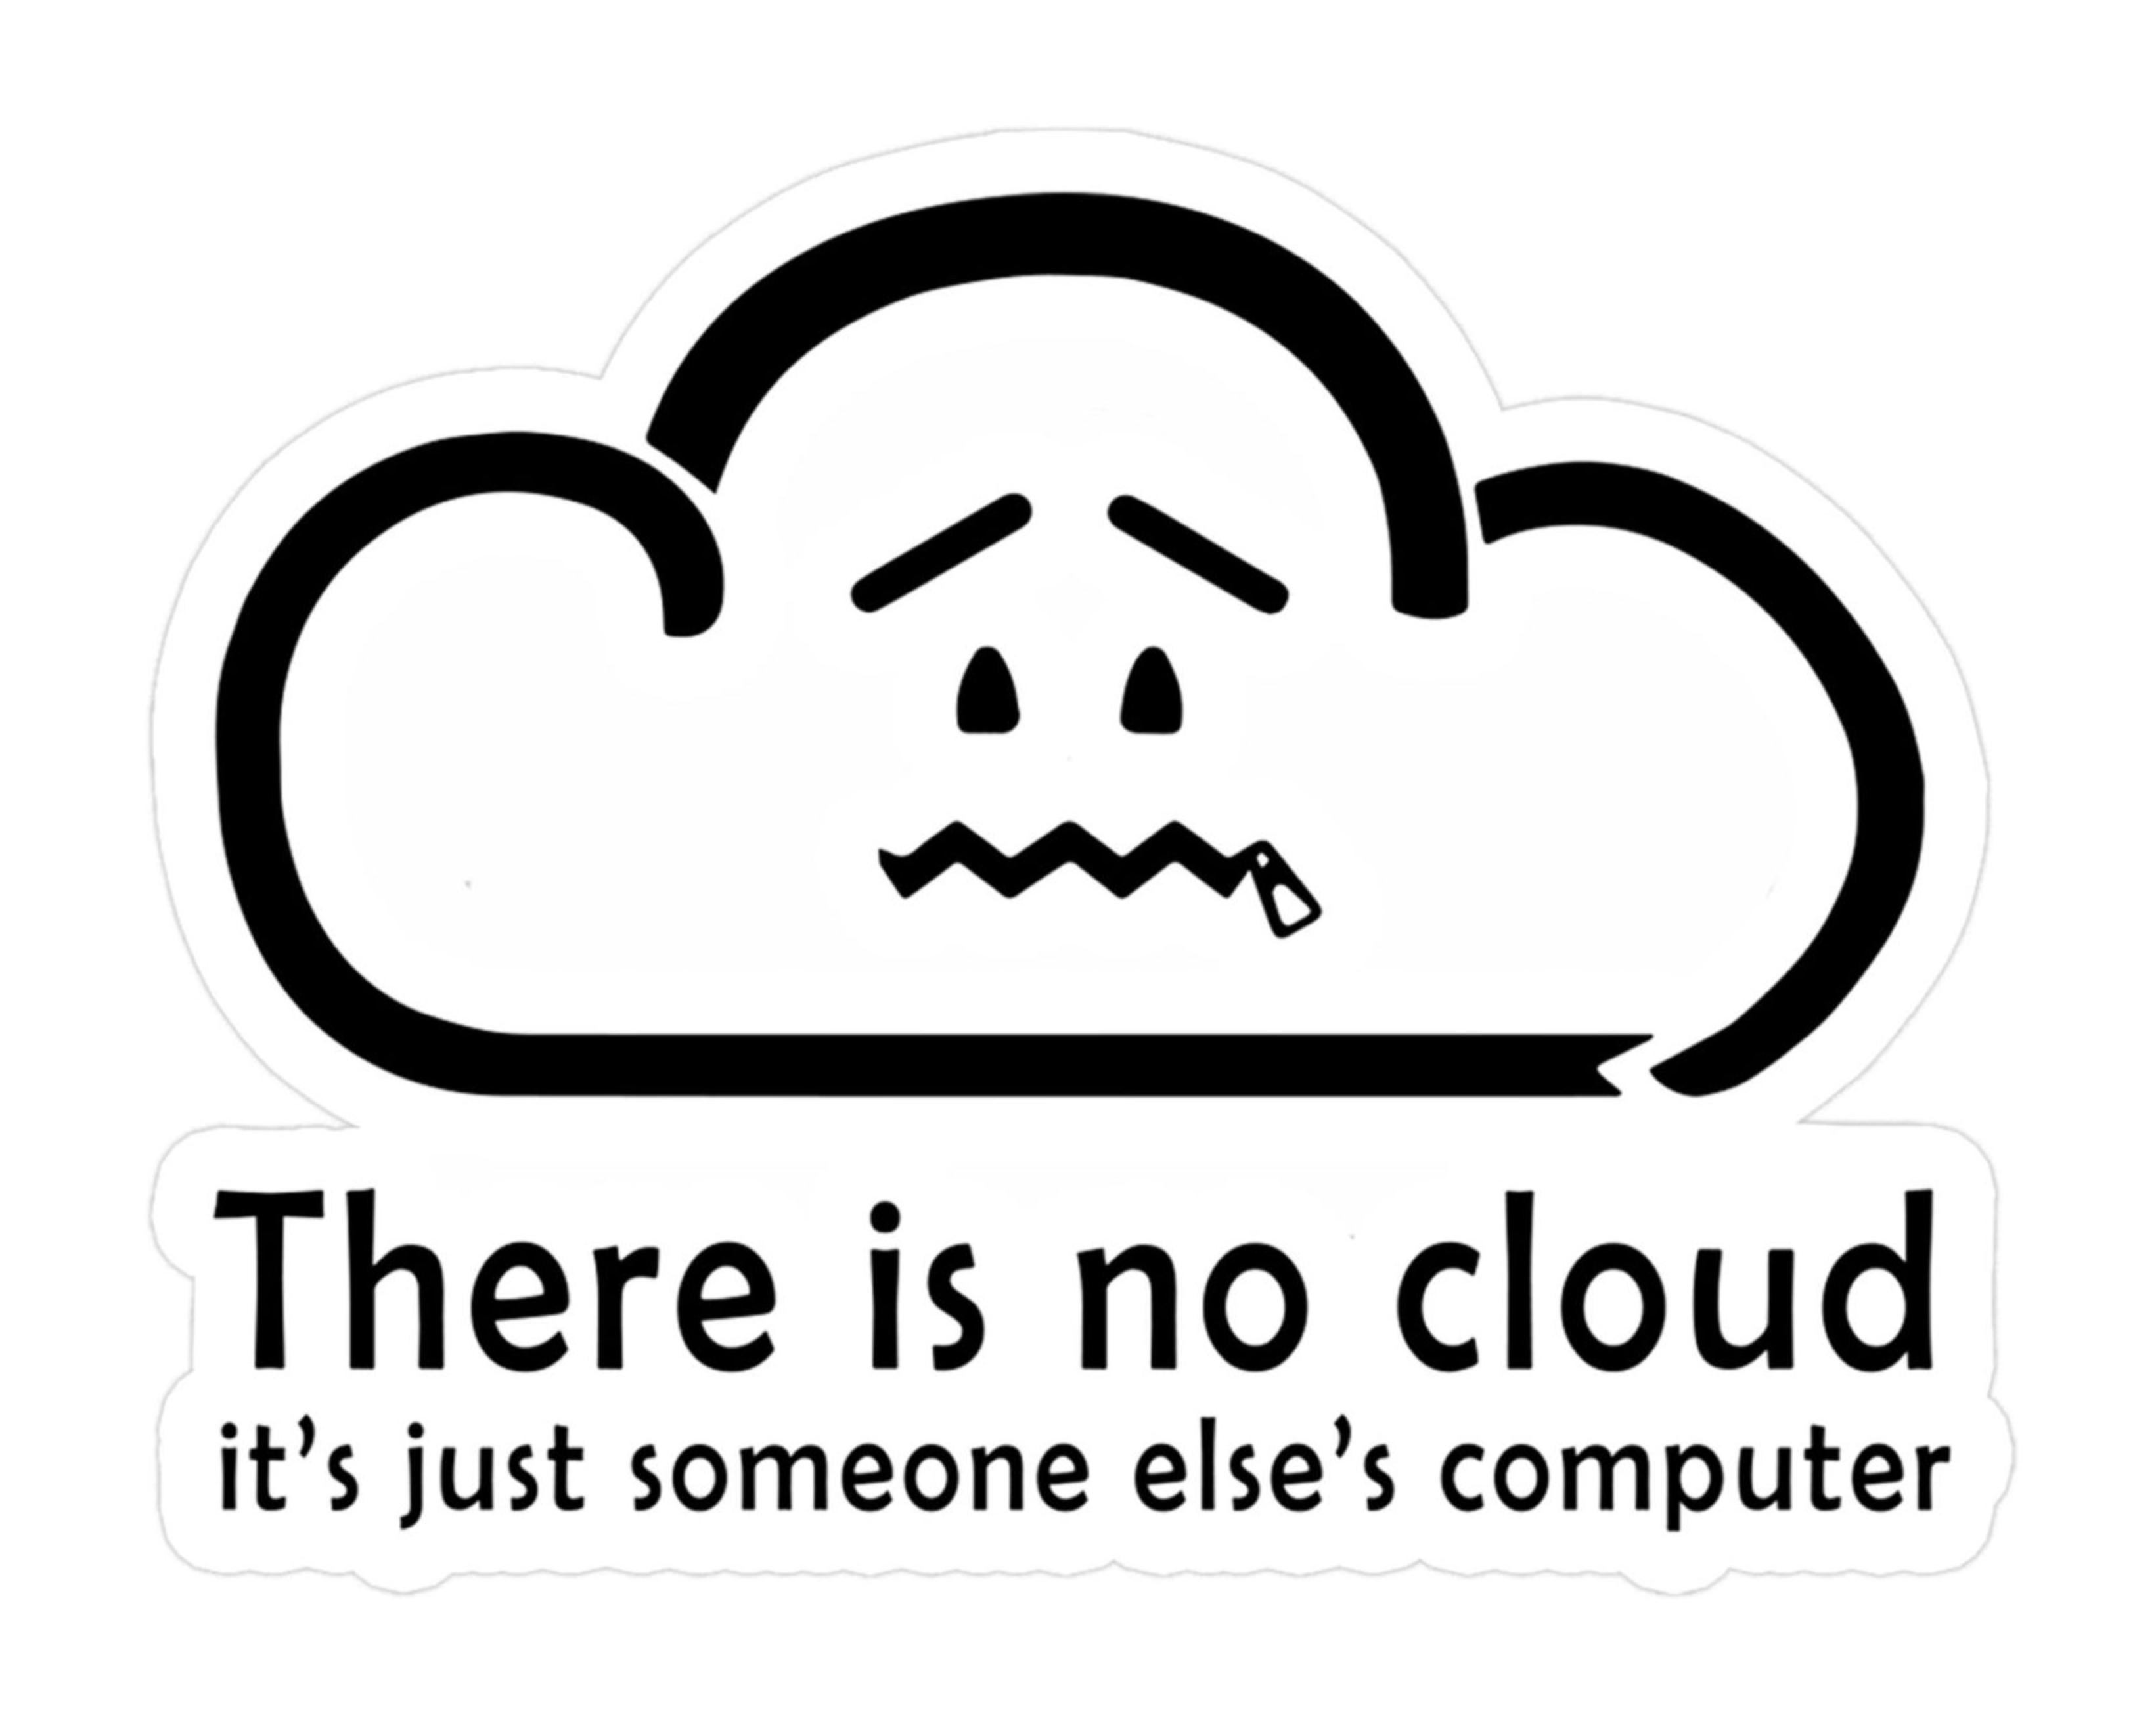 There is no cloud… it's just someone else's computer